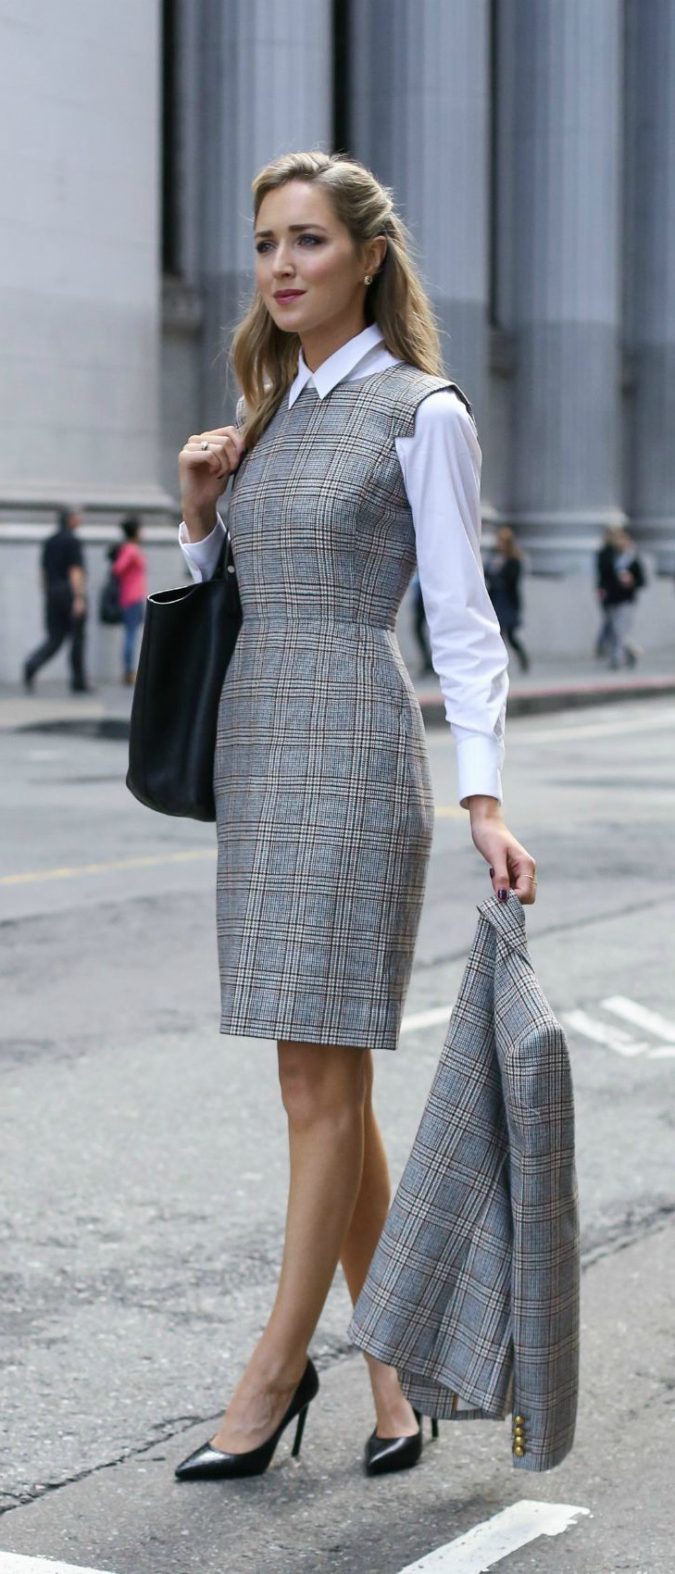 The Grey Dress. e1597876664646 What Women Should Wear for a Business Meeting [60+ Outfit Ideas] - 1